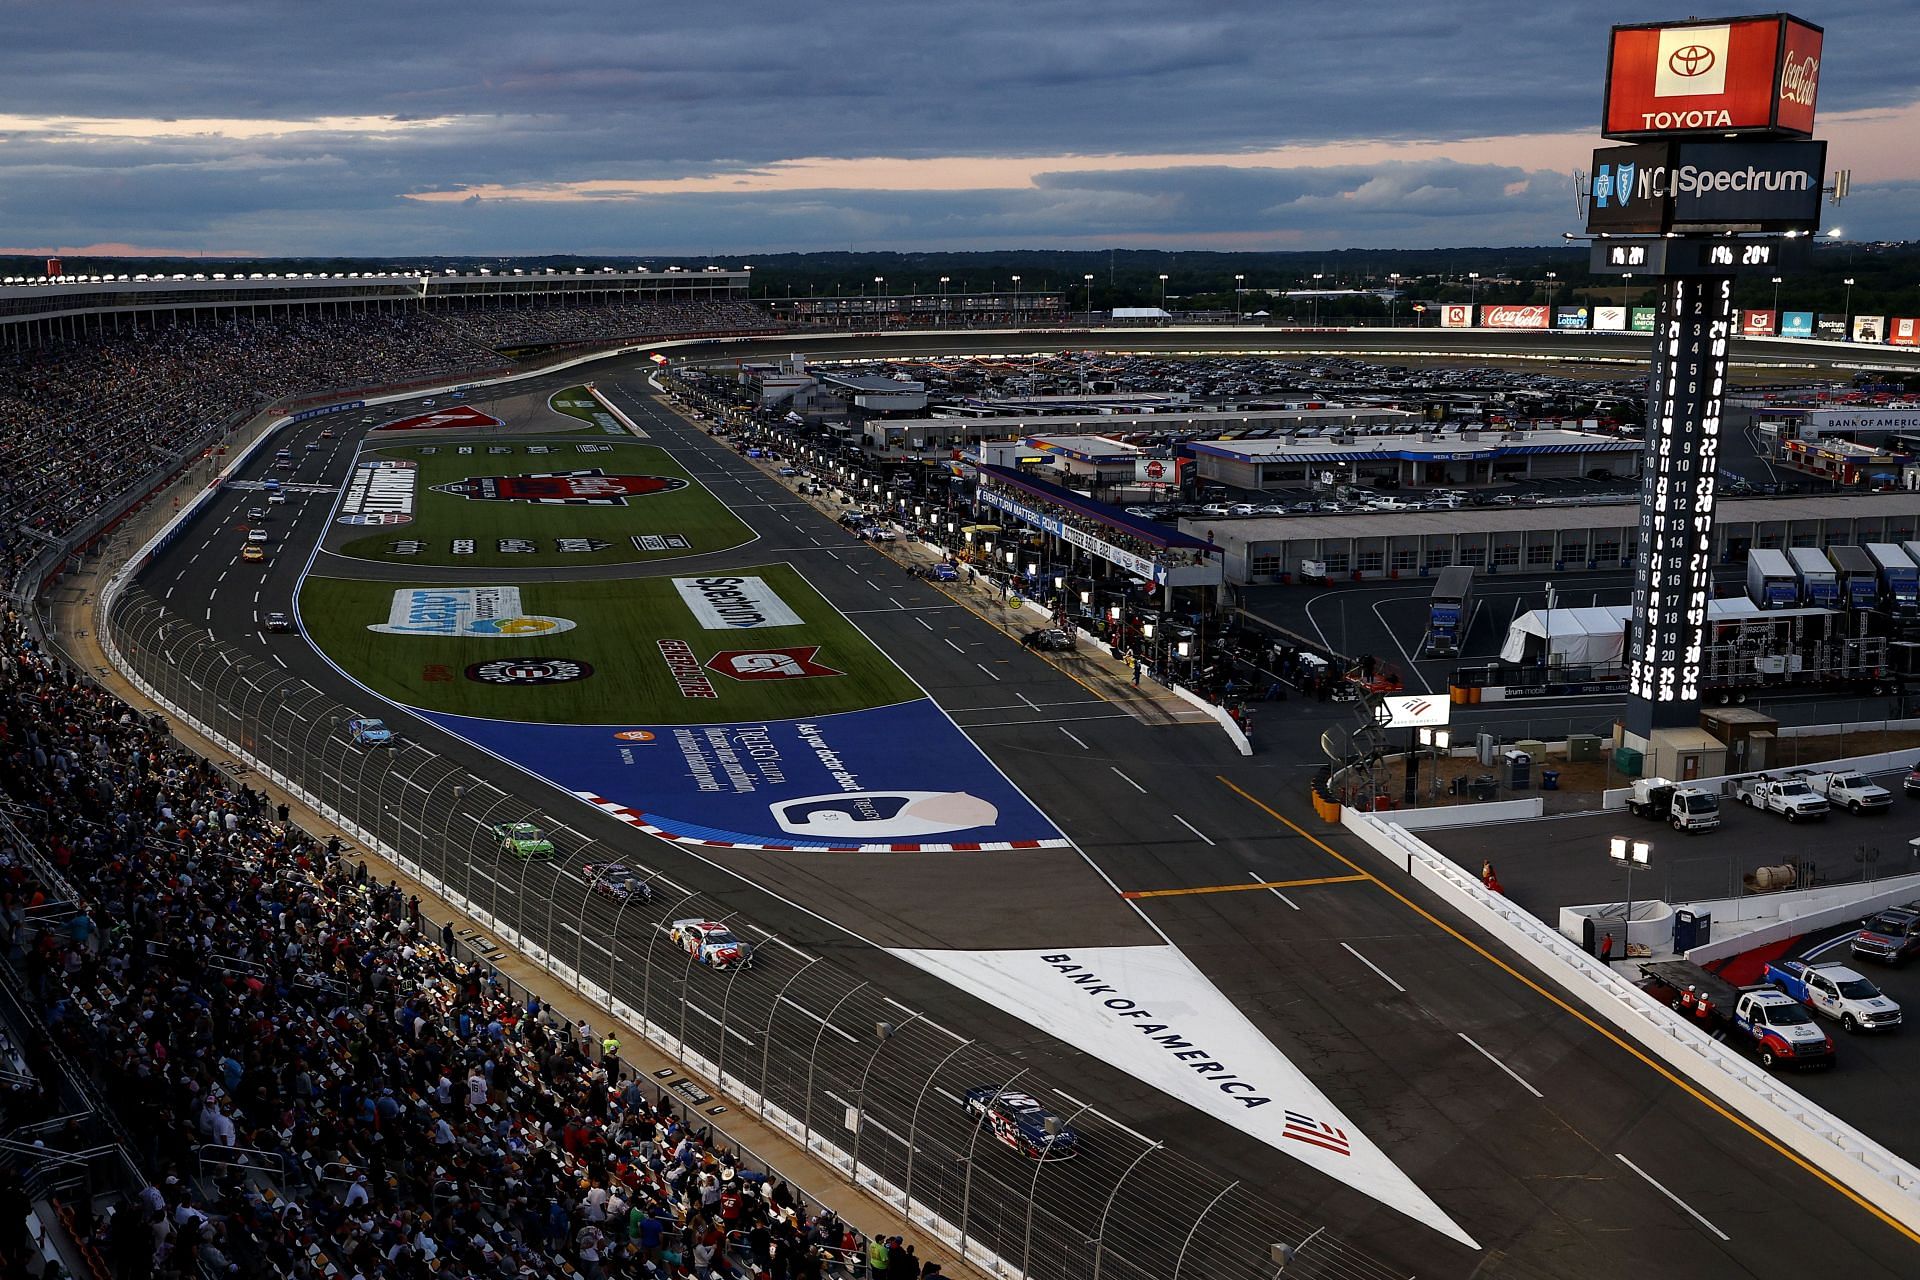 NASCAR 2022 Where to watch Coca-Cola 600 Qualifying at Charlotte Motor Speedway? Time, TV Schedule and Live Stream